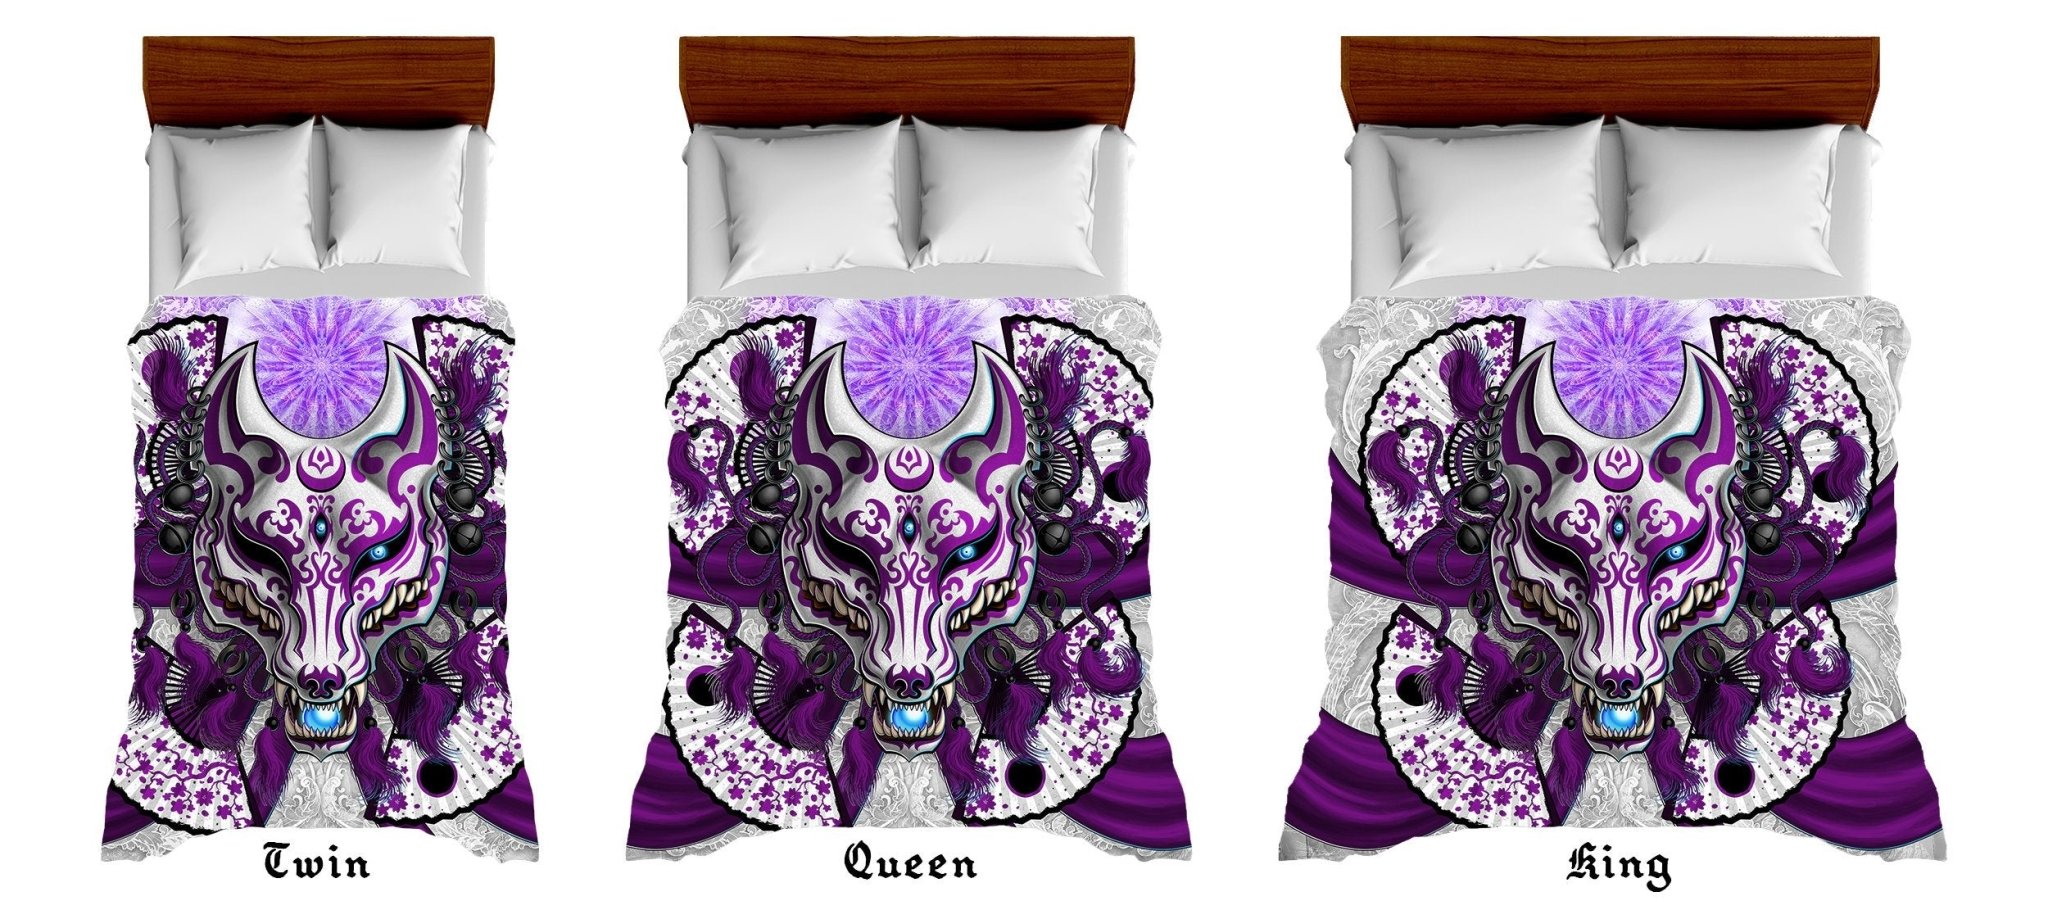 Pastel Goth Kitsune Mask Bedding Set, Comforter and Duvet, Fox Okami, Anime Bed Cover and Bedroom Decor, King, Queen and Twin Size - White, Purple - Abysm Internal